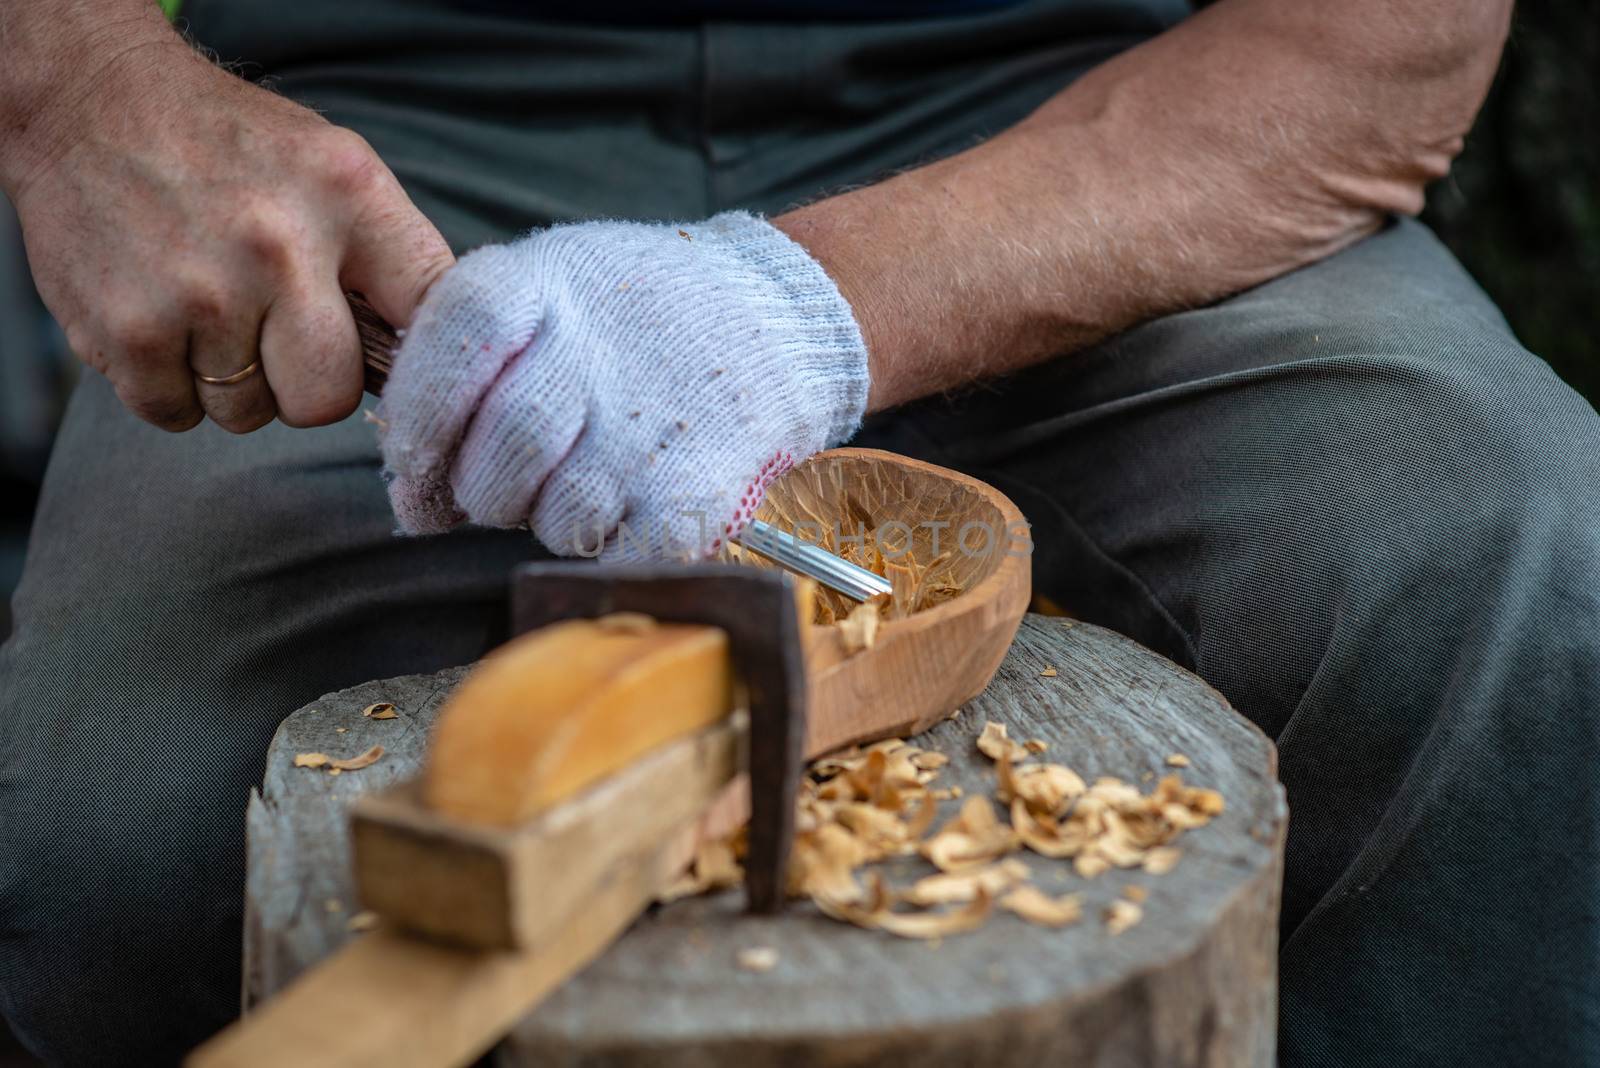 Craftsman demonstrates the process of making wooden spoons handmade using tools. National crafts concept.